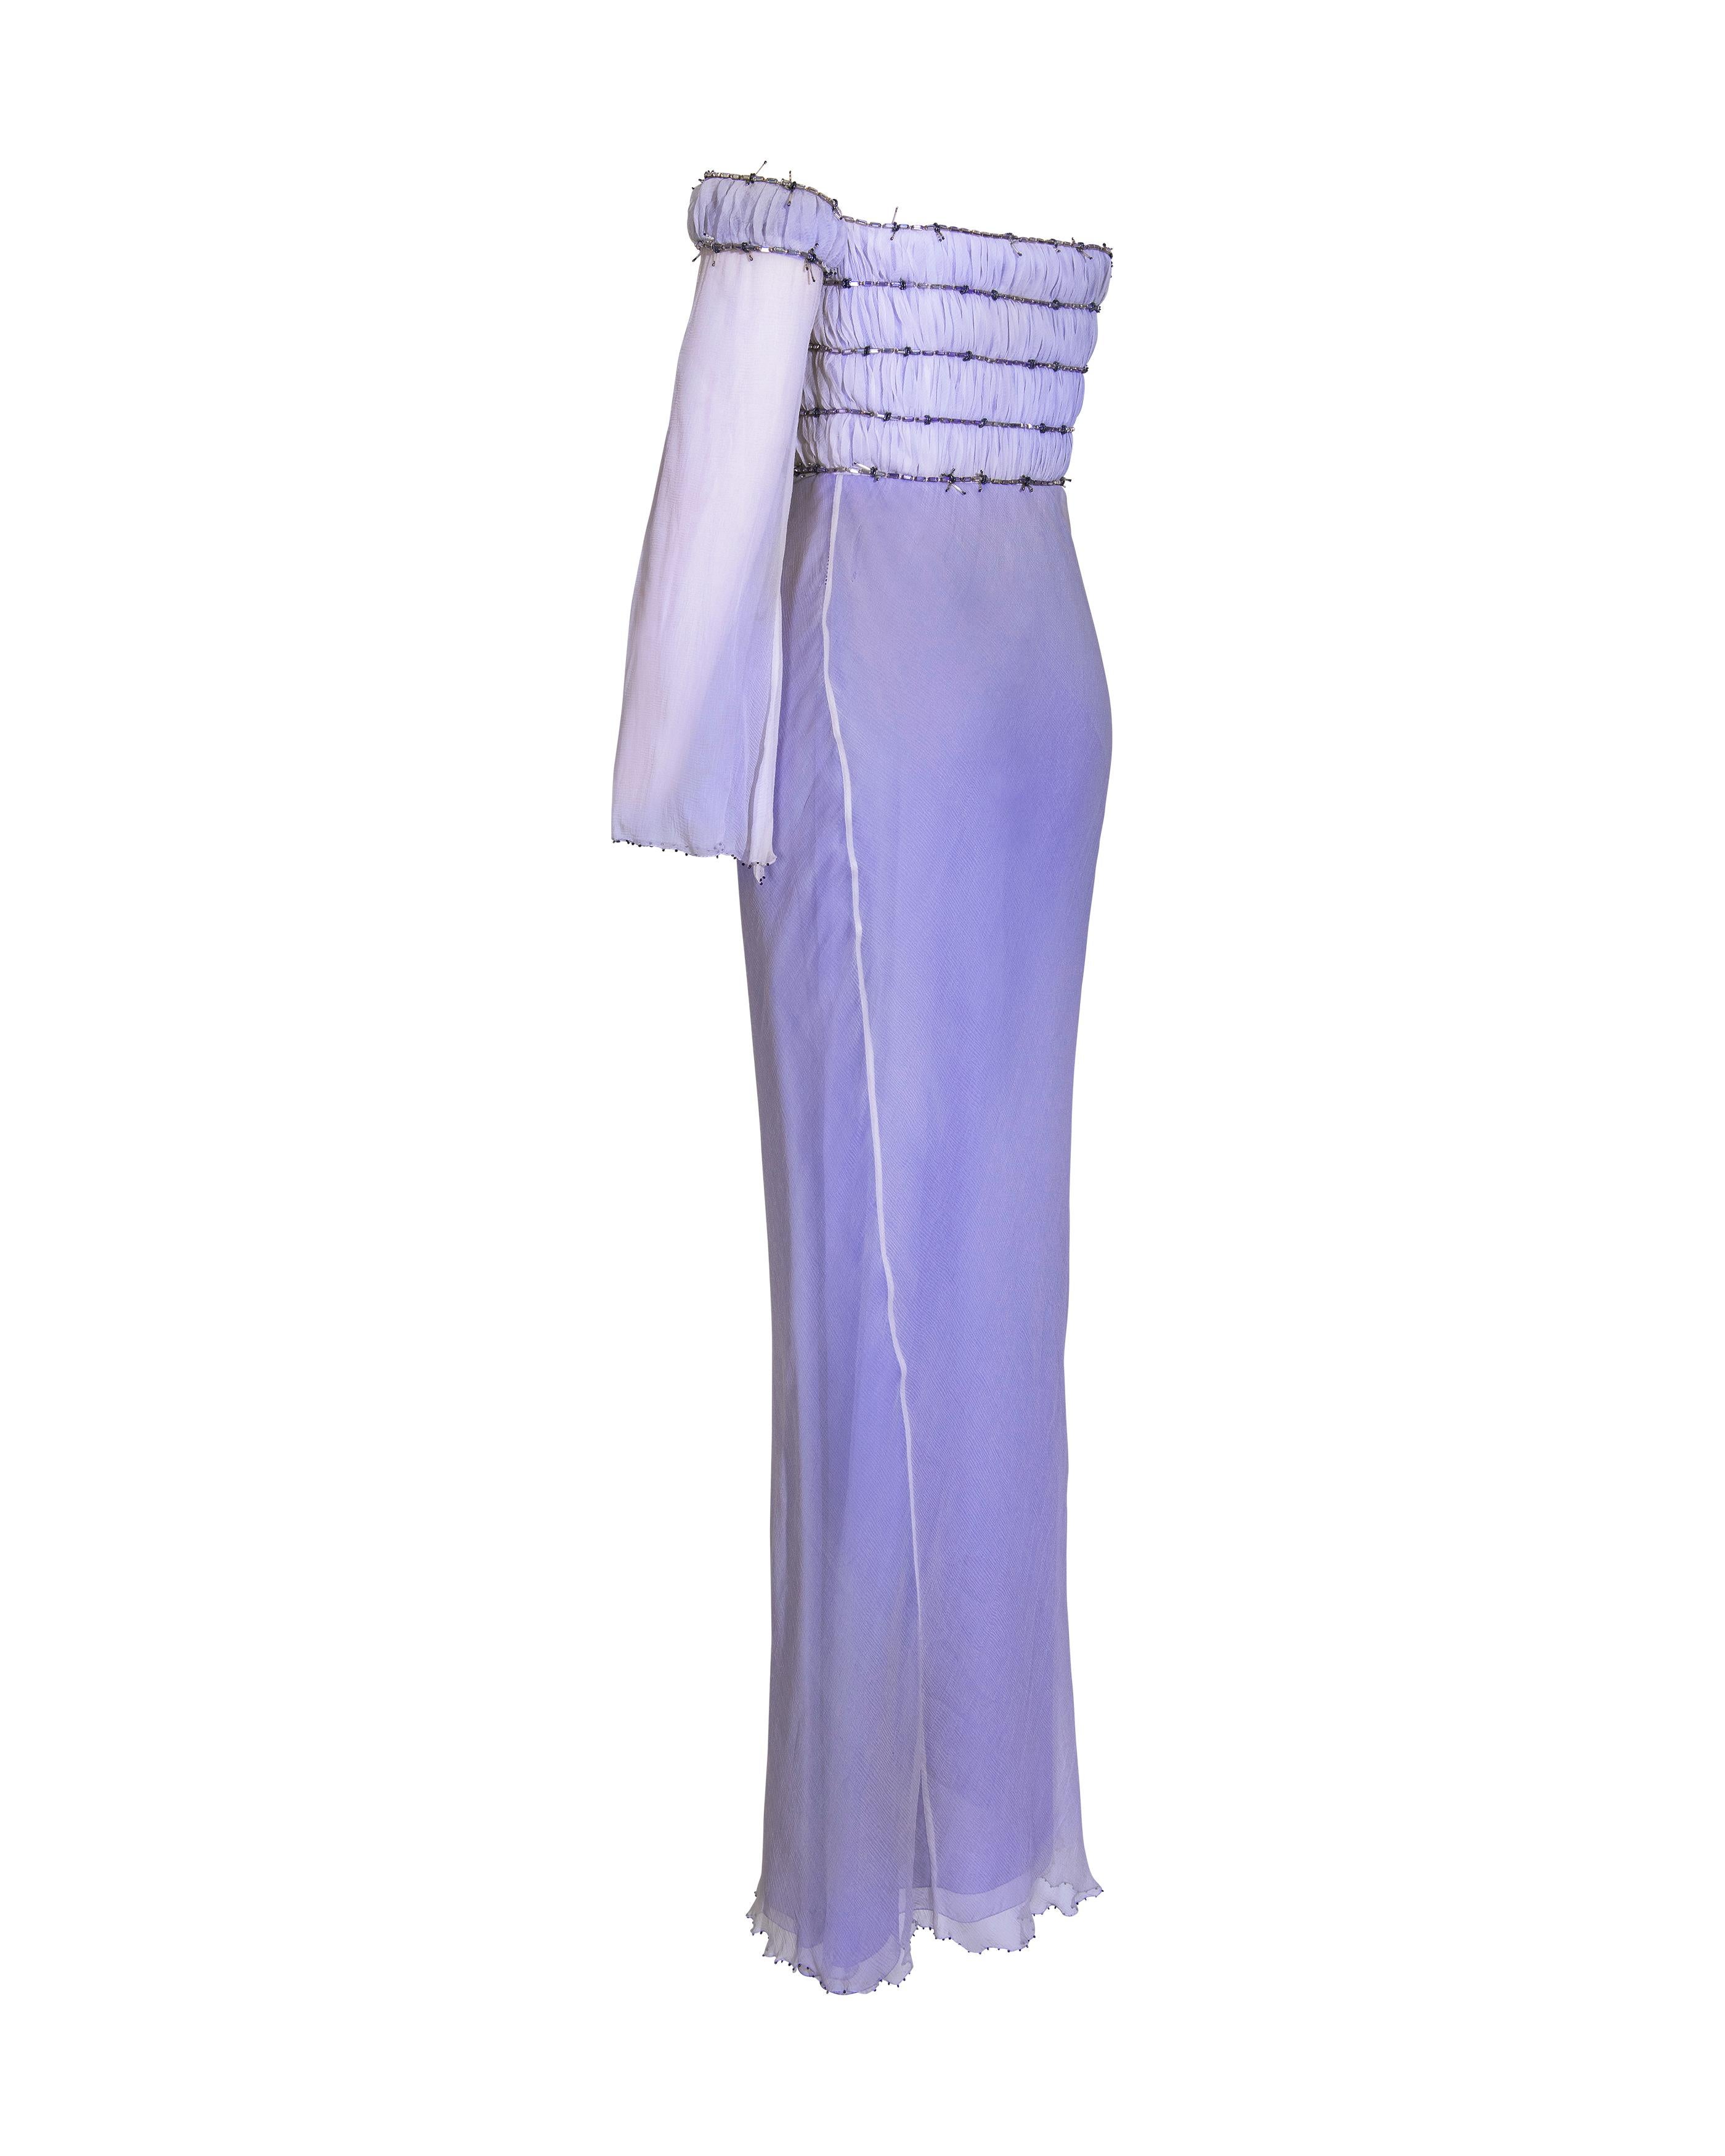 A/W 1998 Gianni Versace Purple Strapless One-Shoulder 'Barbed Wire' Gown 5